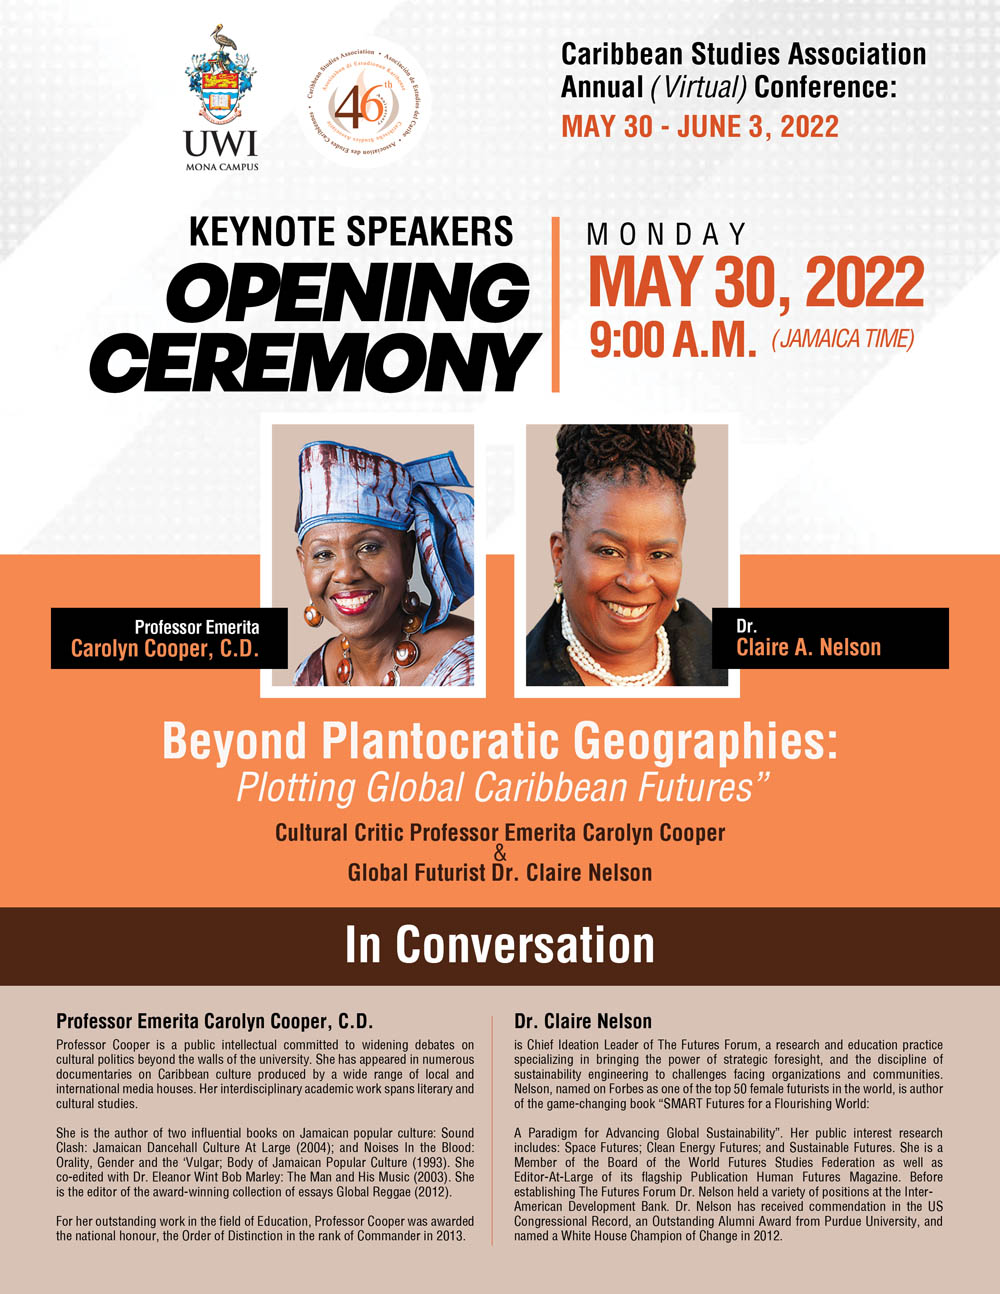 2022 CSA Conference Opening Ceremony keynote speakers